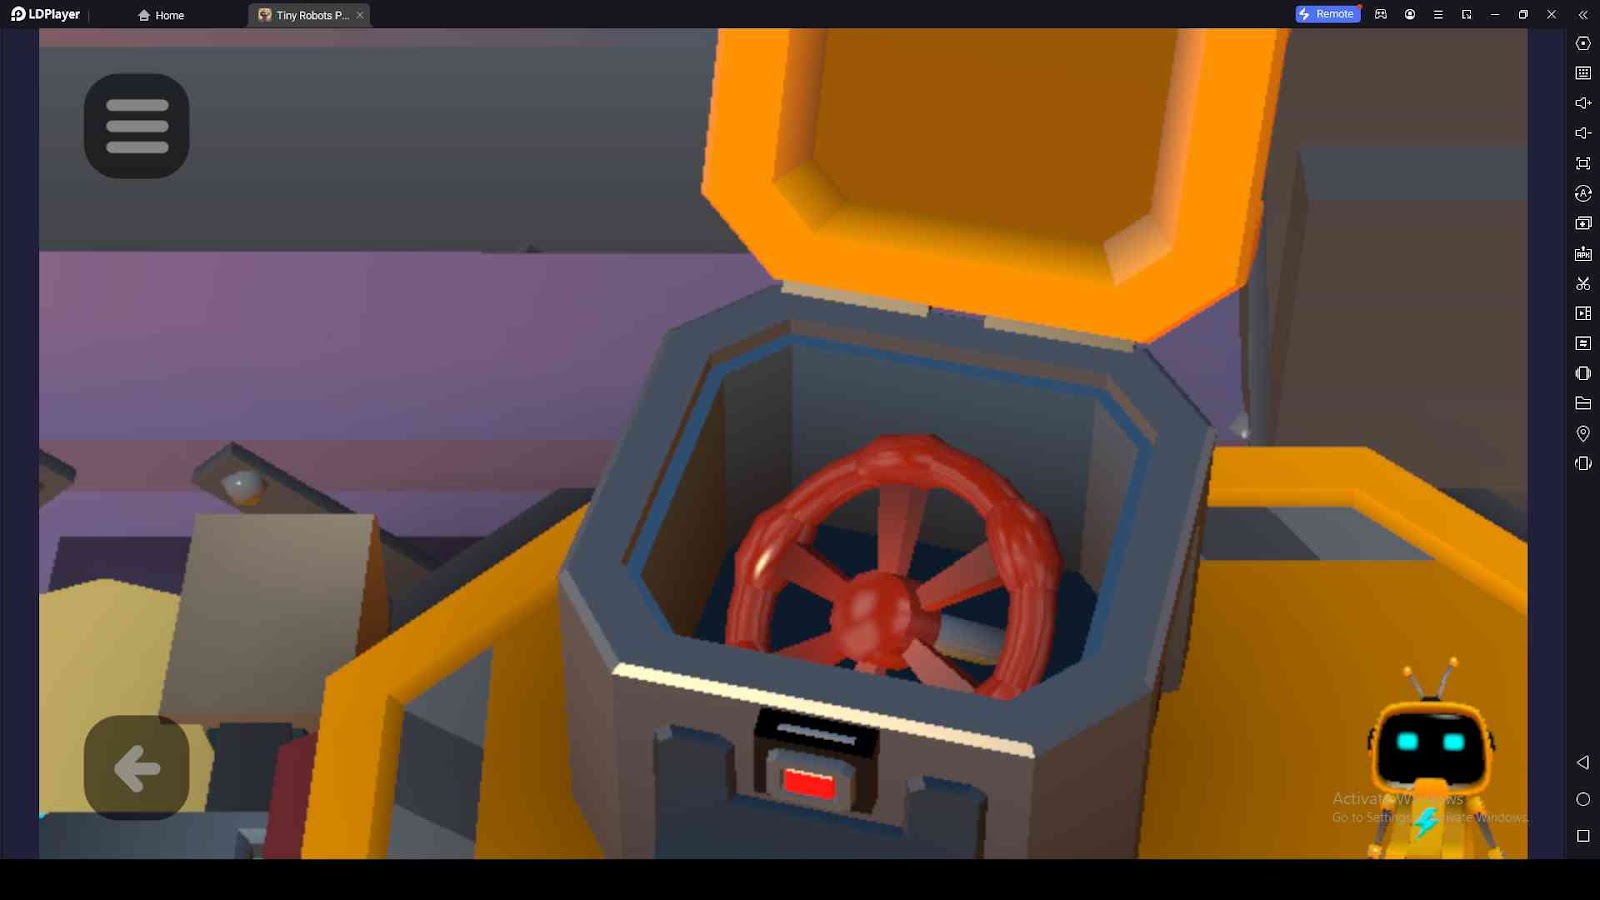 Collect Every Item You See in Tiny Robots: Portal Escape